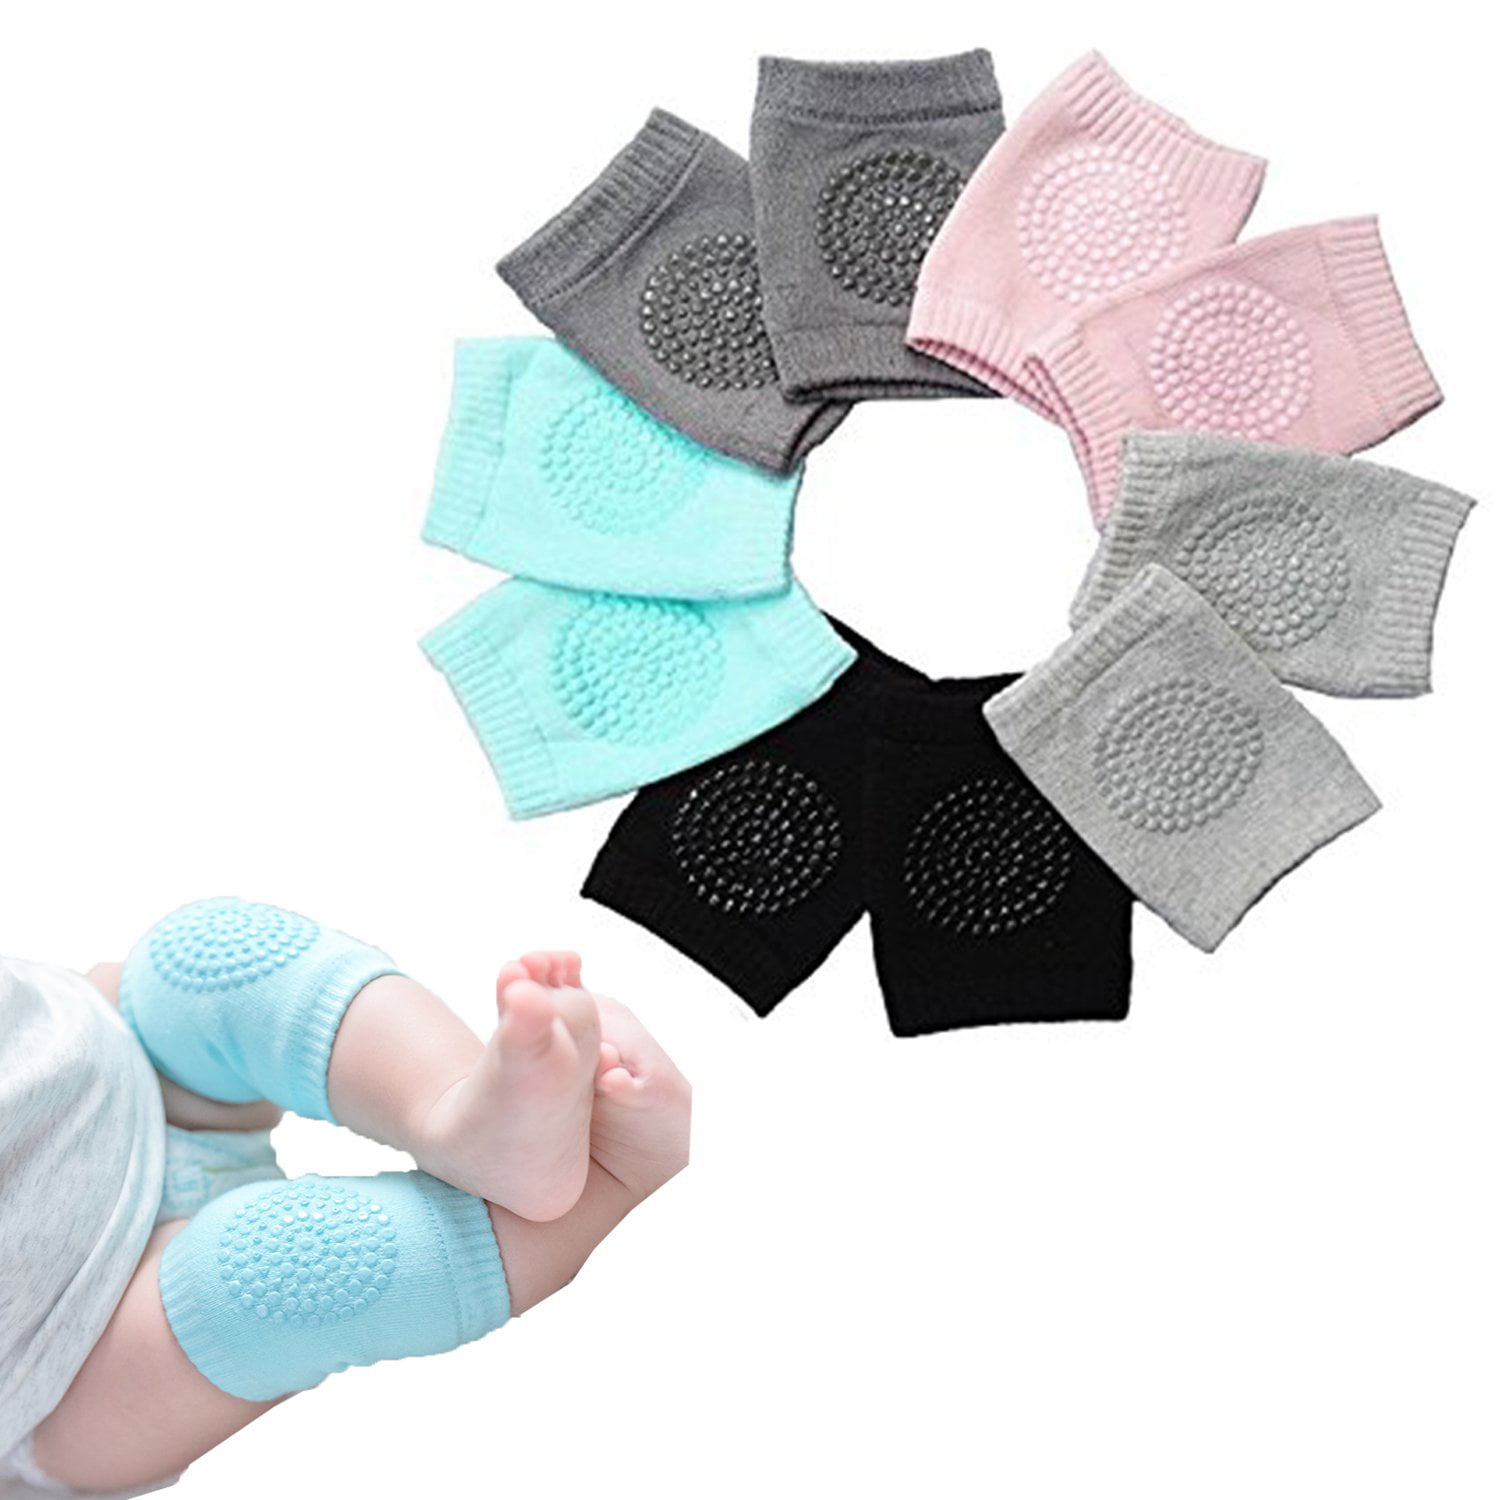 Infant Baby Safety Crawling Elbow Cushion Toddler Knee Pads Knee Protector Pad L